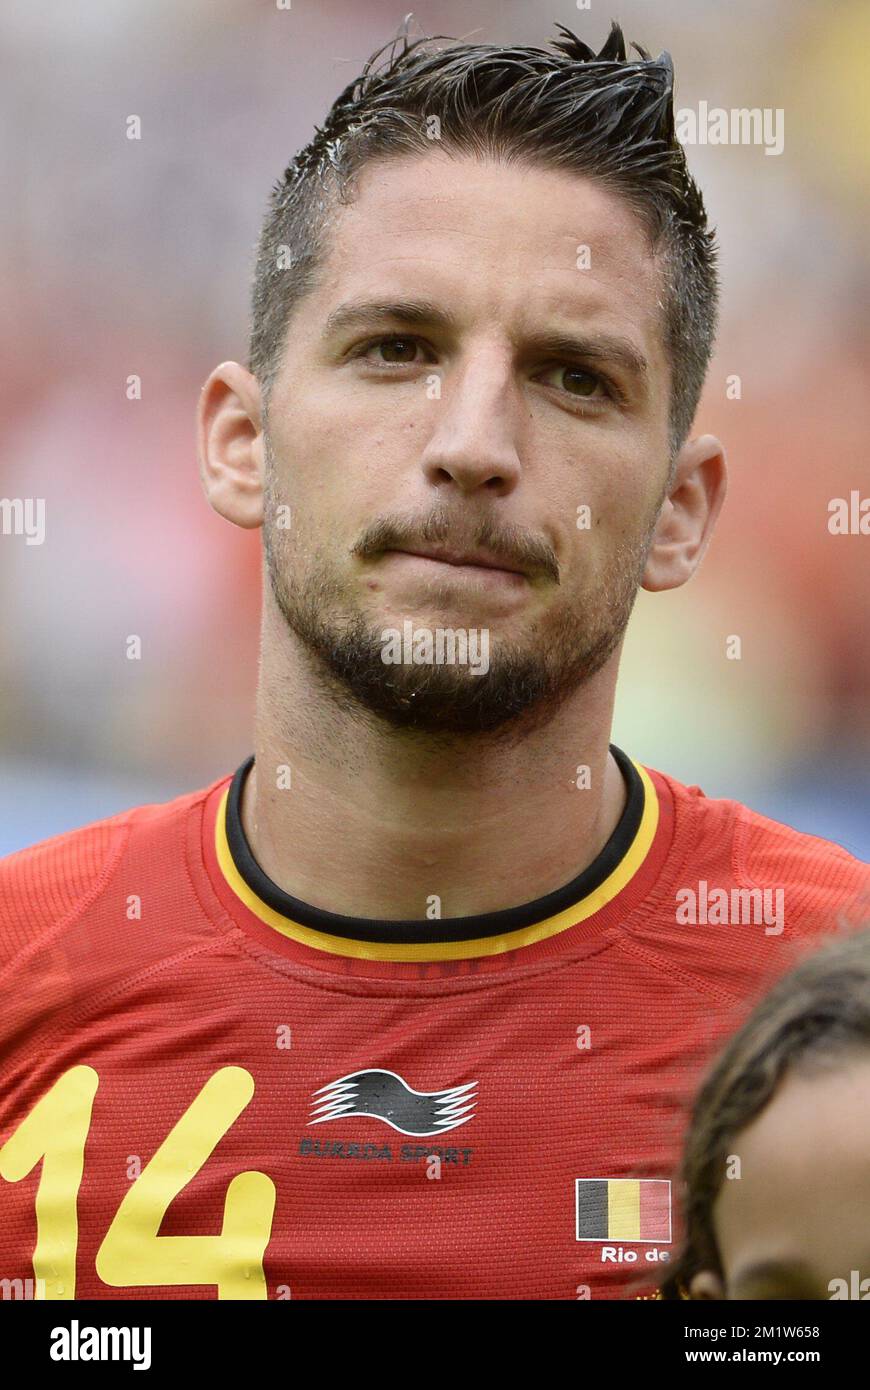 20140622 - RIO DE JANEIRO, BRAZIL: Belgium's Dries Mertens pictured at the start of a soccer game between Belgian national team The Red Devils and Russia in Rio de Janeiro, Brazil, the second game in Group H of the first round of the 2014 FIFA World Cup, Sunday 22 June 2014.   BELGA PHOTO DIRK WAEM Stock Photo